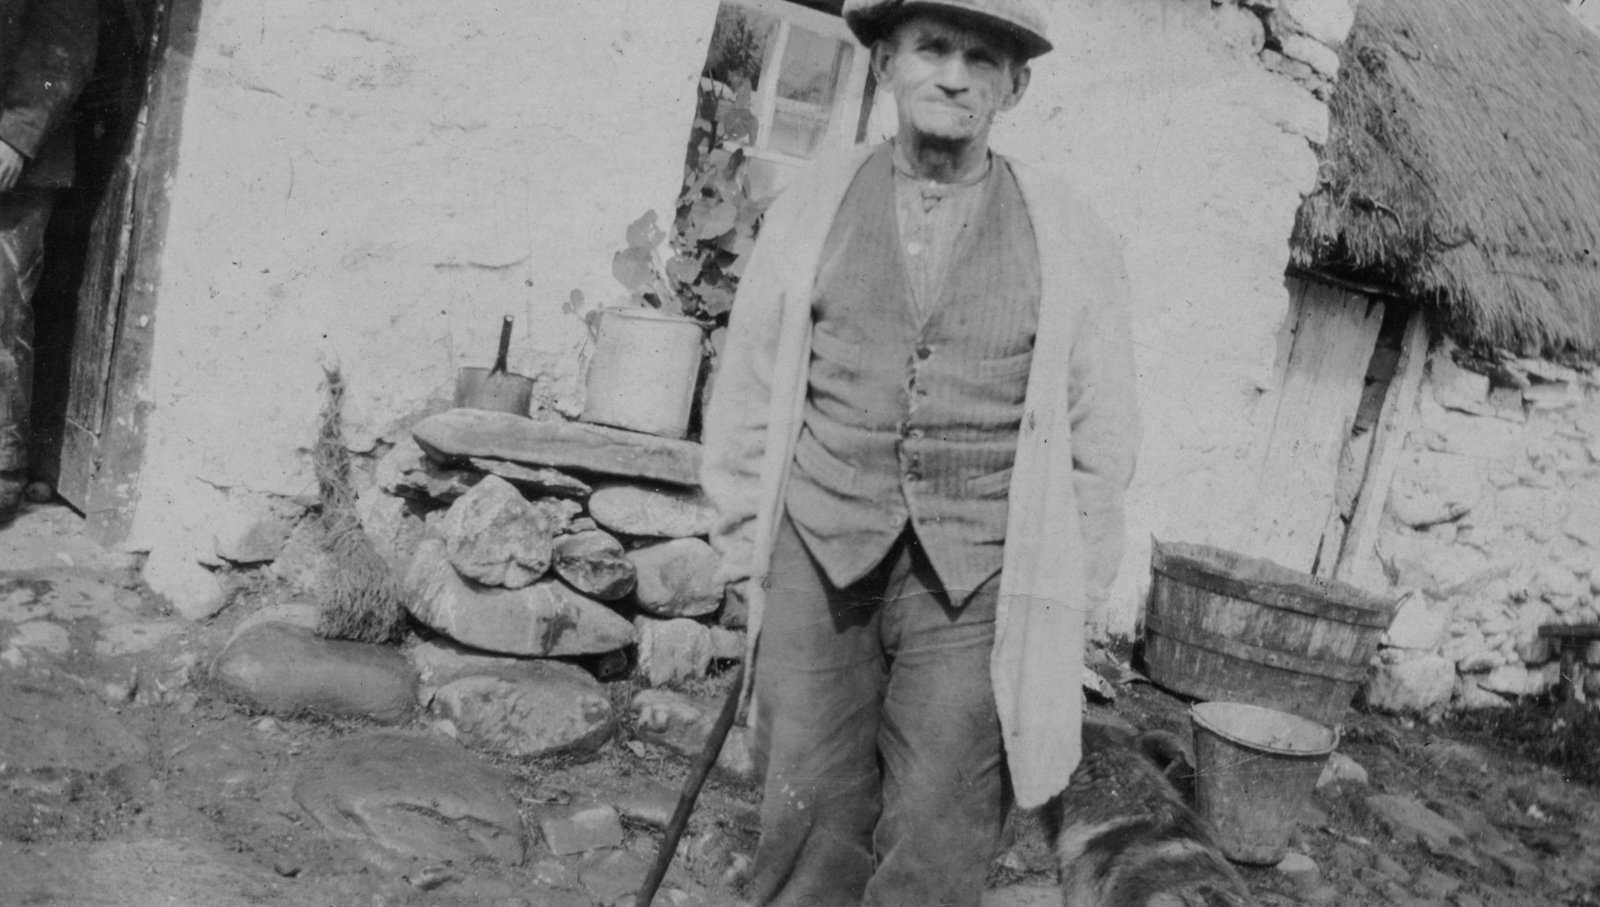 Philip McGing (b. 1869), pictured in Glenmask, Tourmakeady, County Mayo